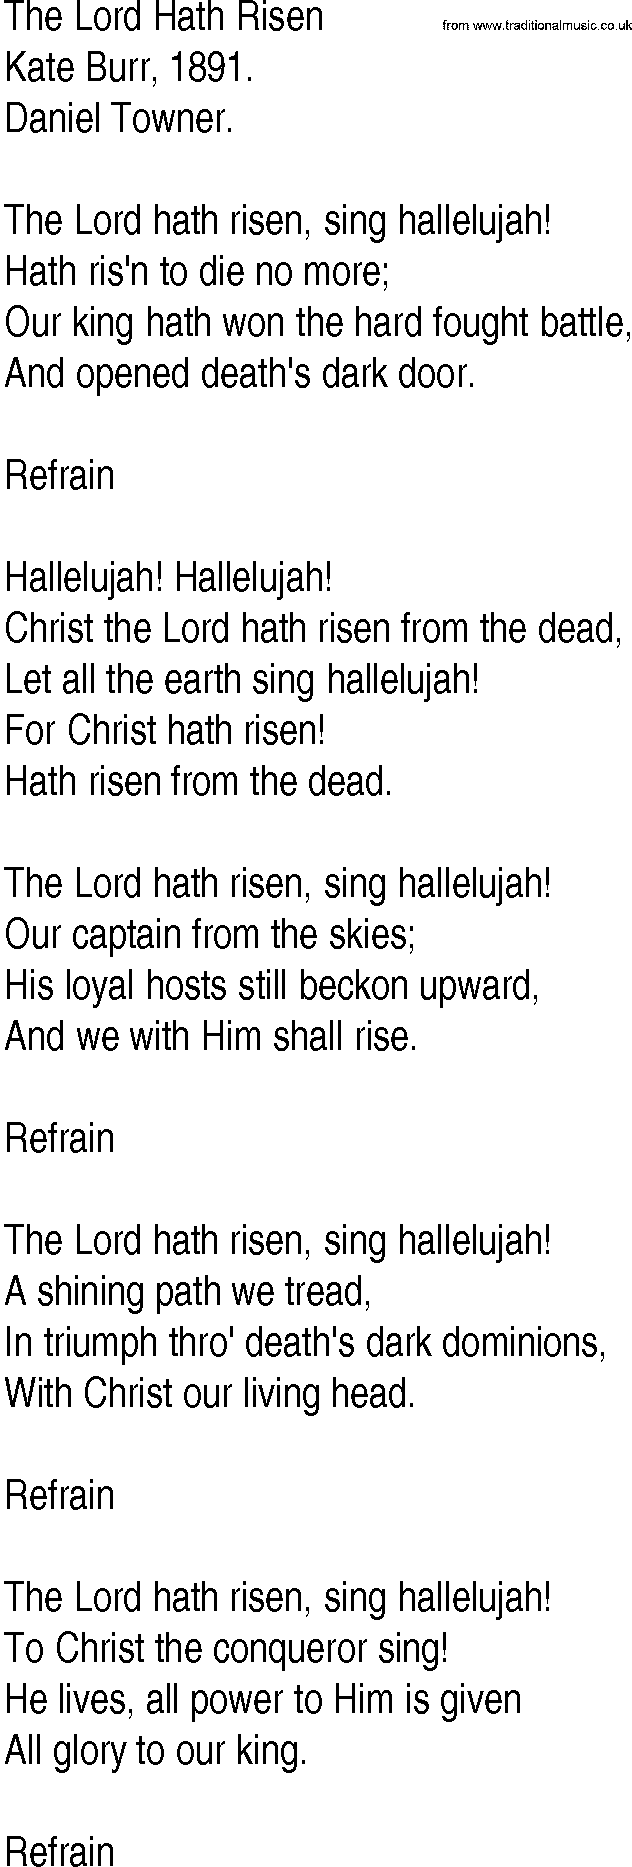 Hymn and Gospel Song: The Lord Hath Risen by Kate Burr lyrics